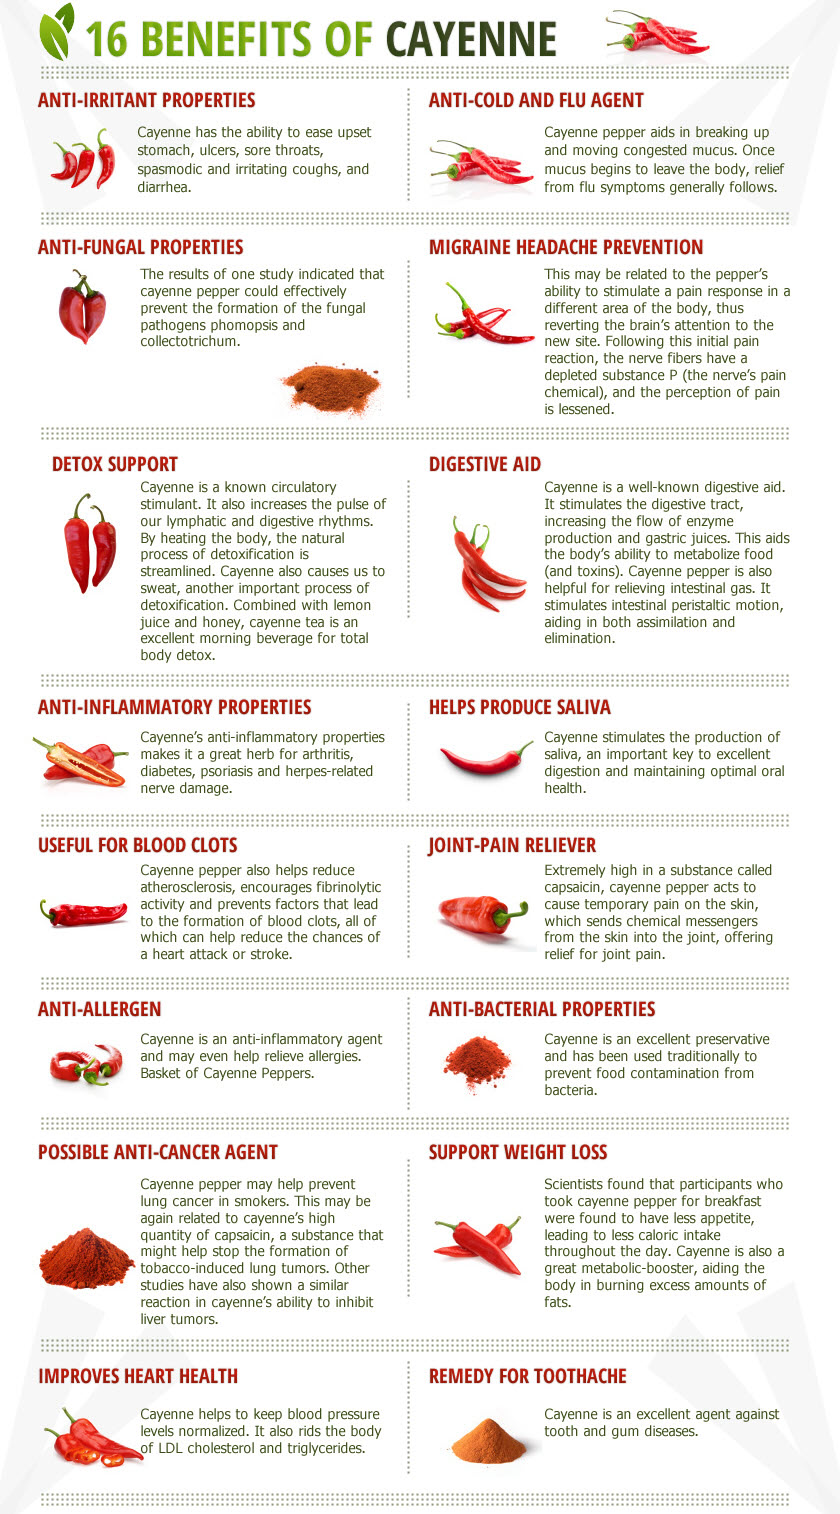 cayenne-pepper-and-weight-loss-2